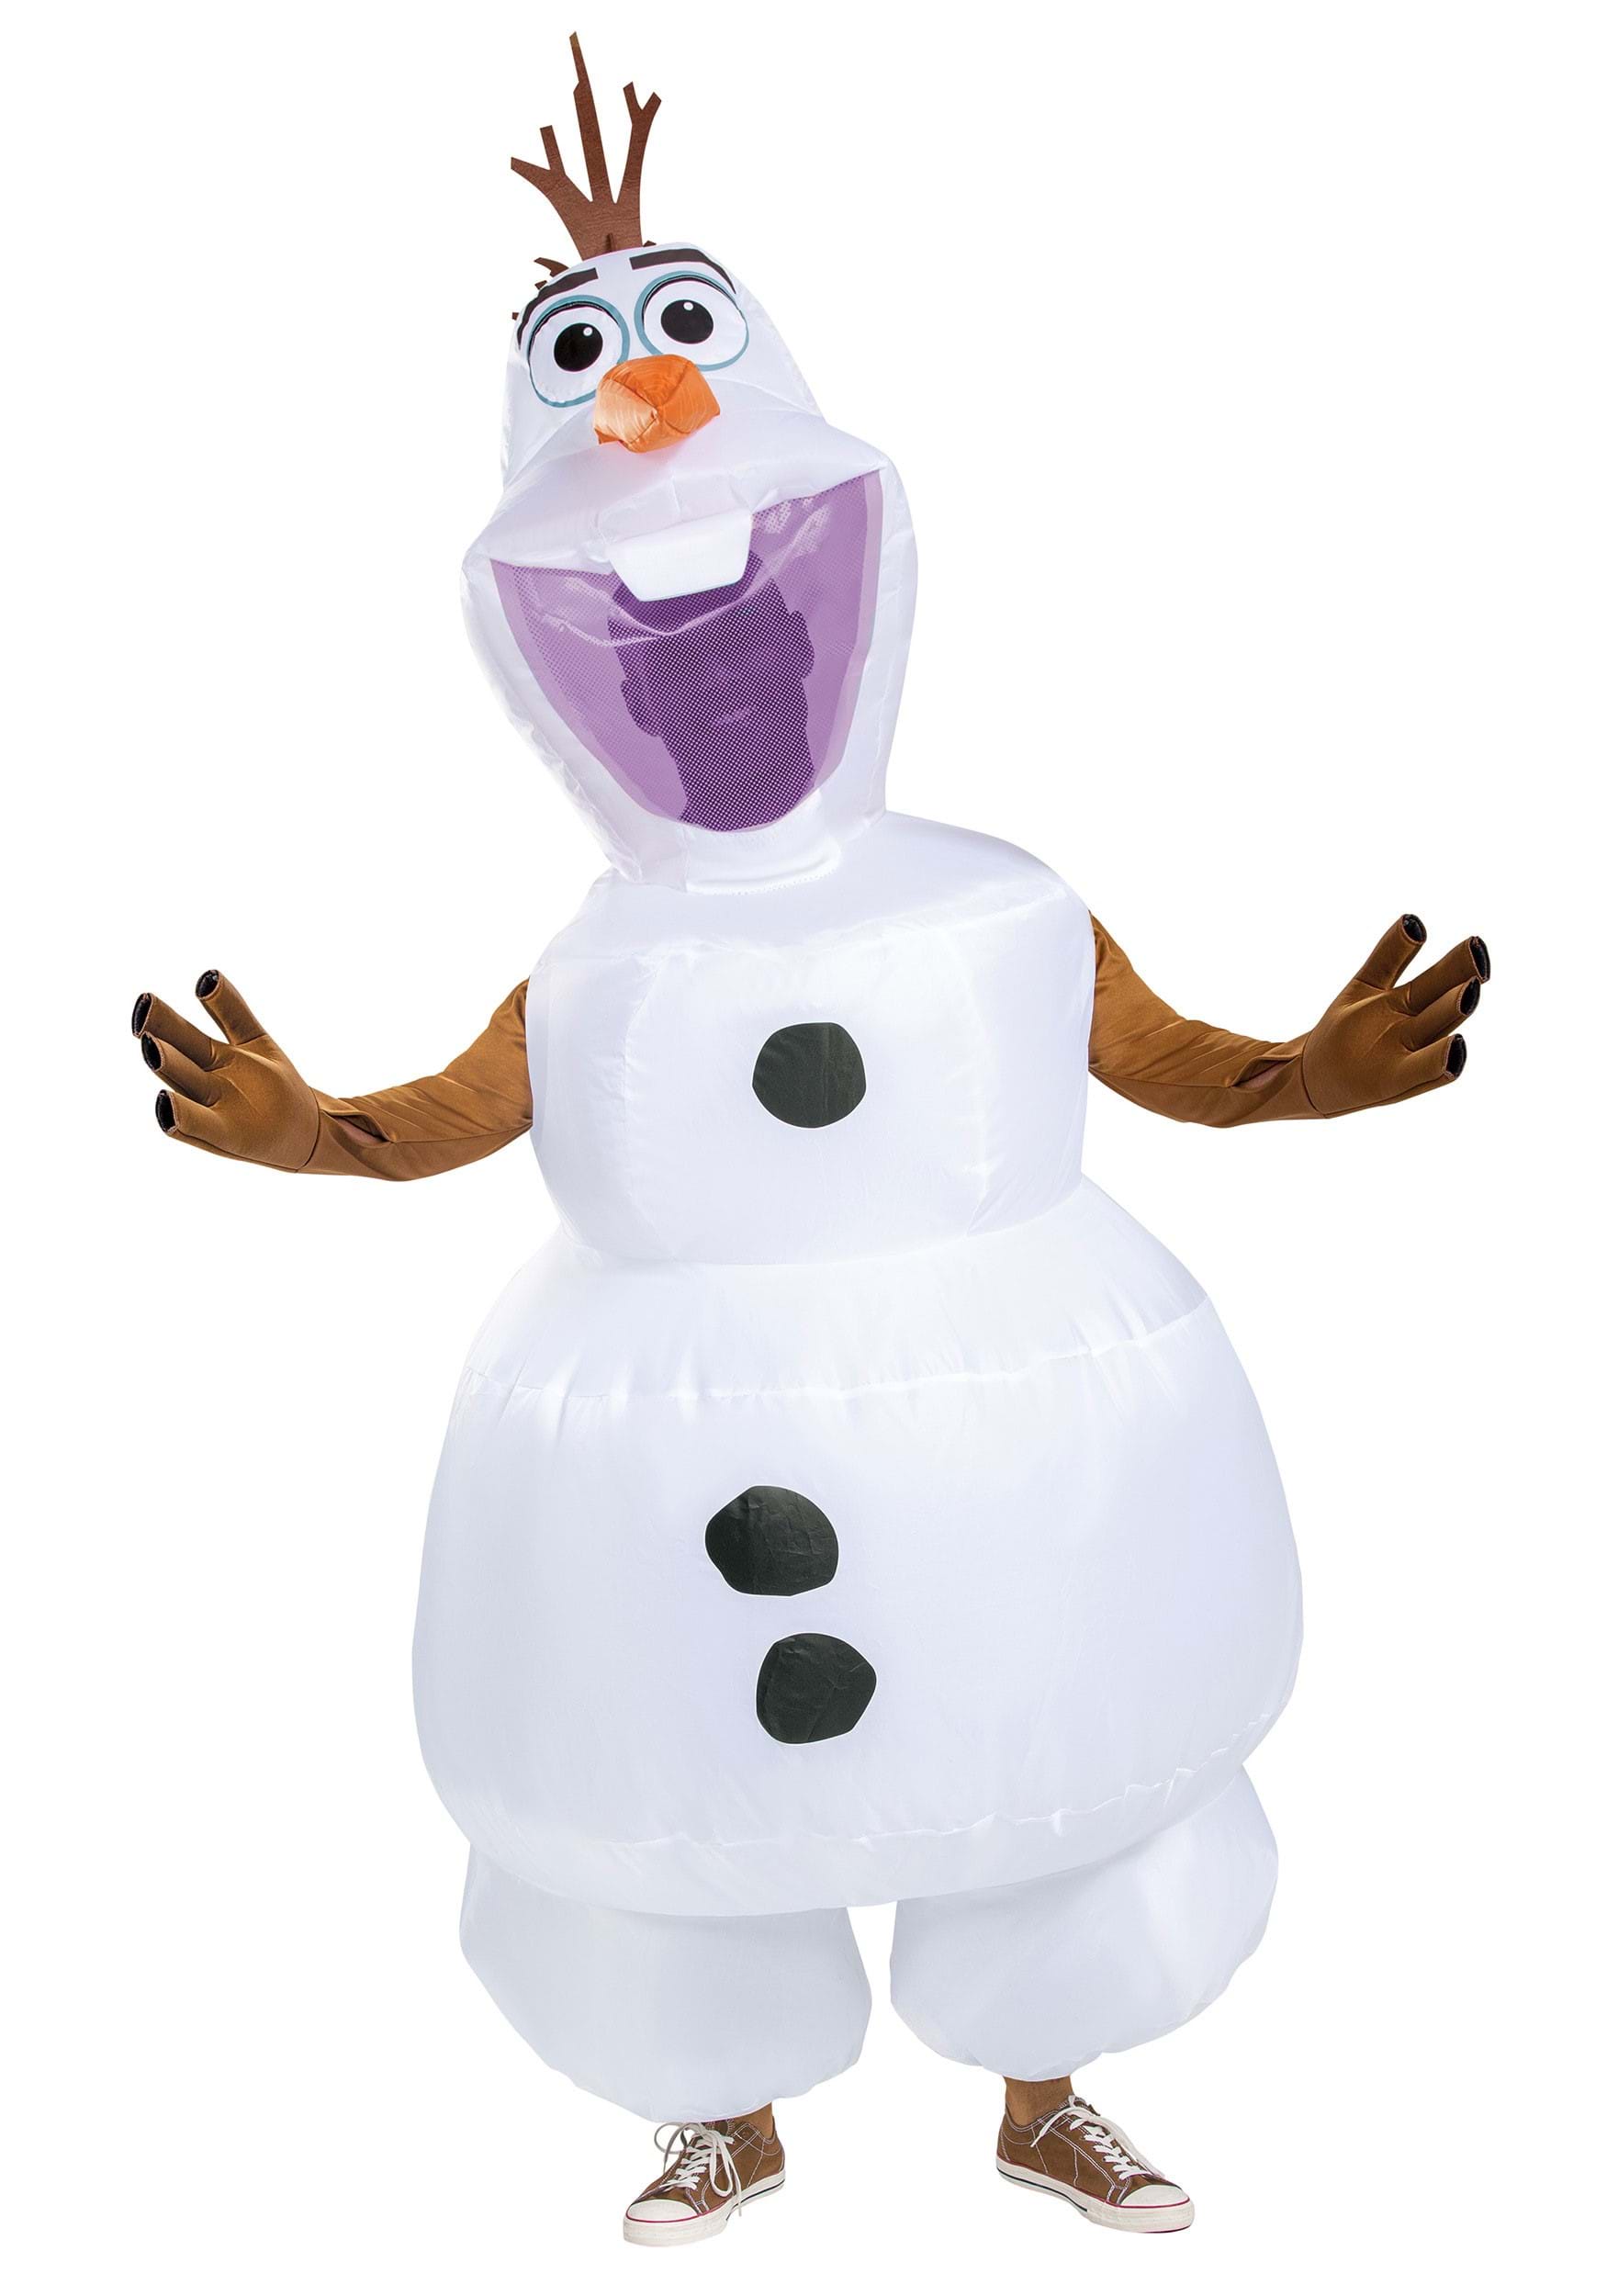 Inflatable Olaf Frozen Figure